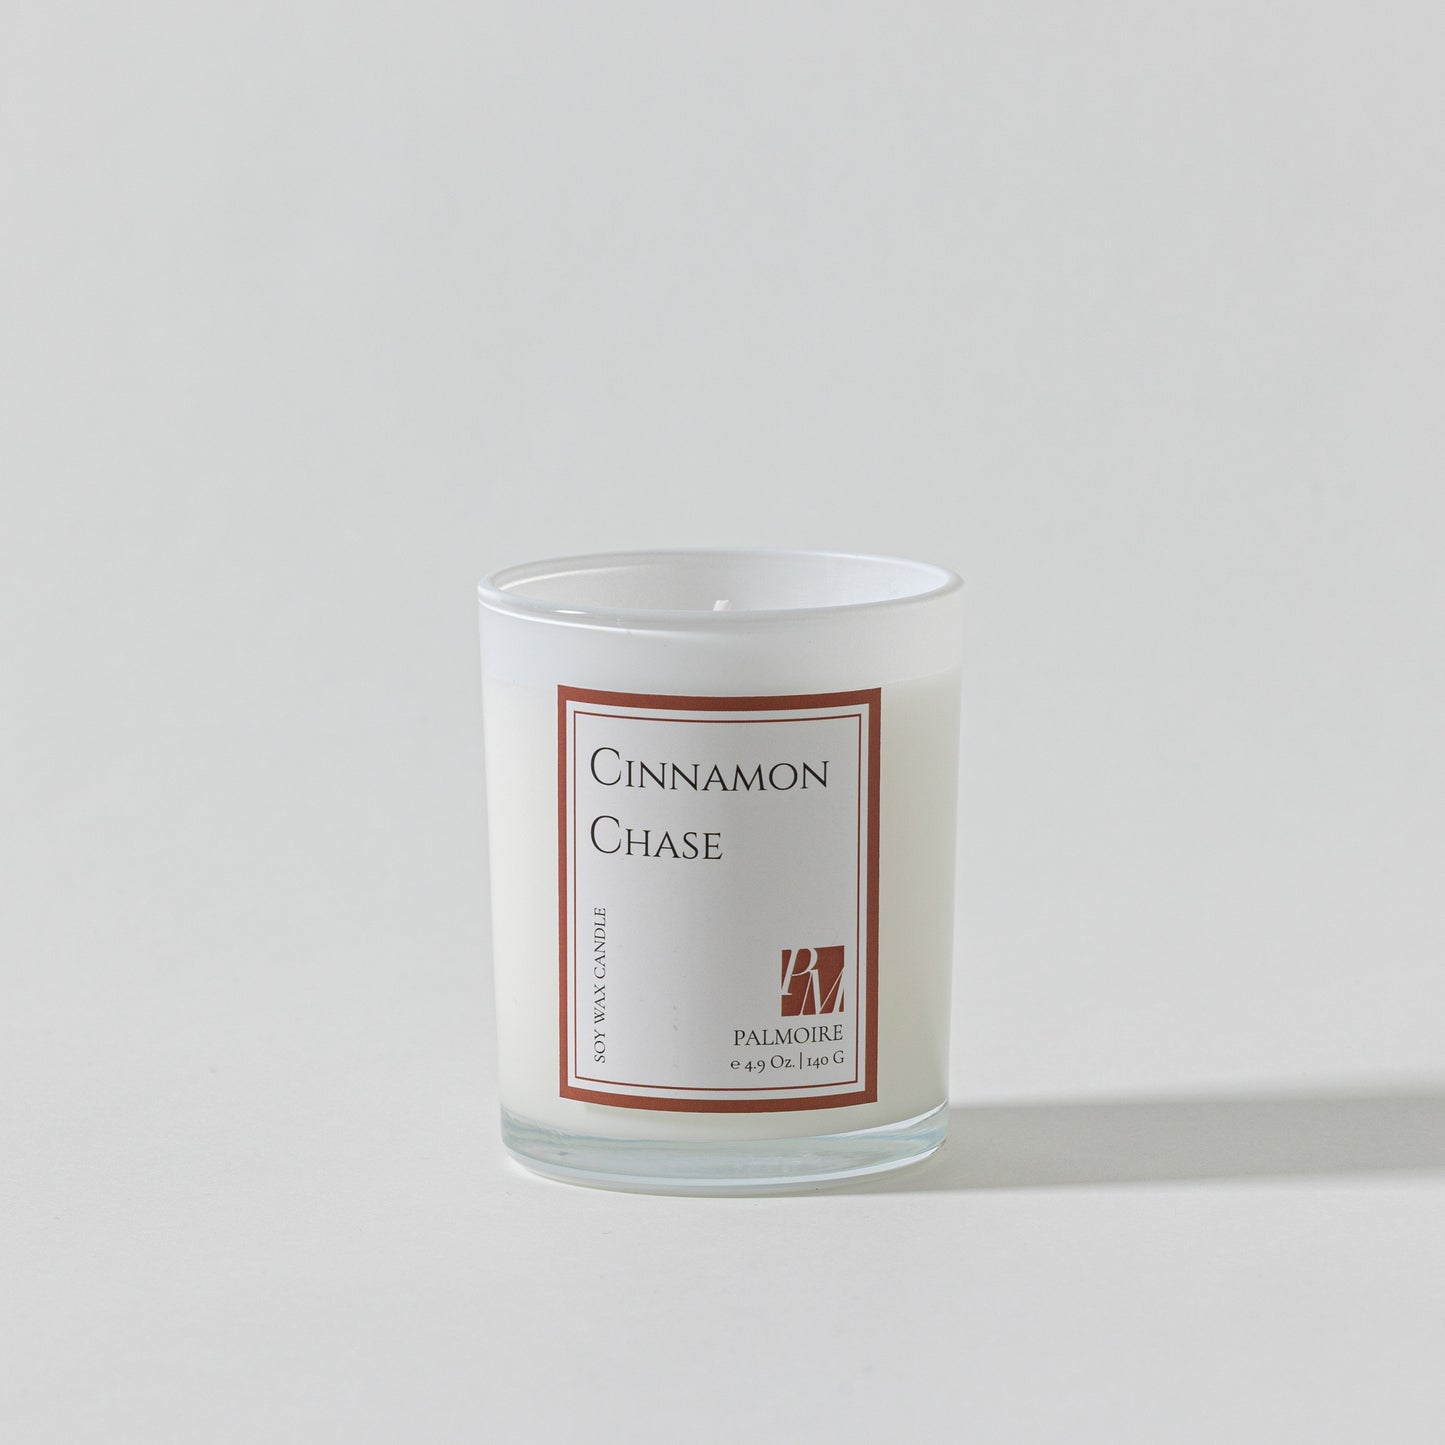 Cinnamon Chase Soy Wax Candle - PALMOIRE